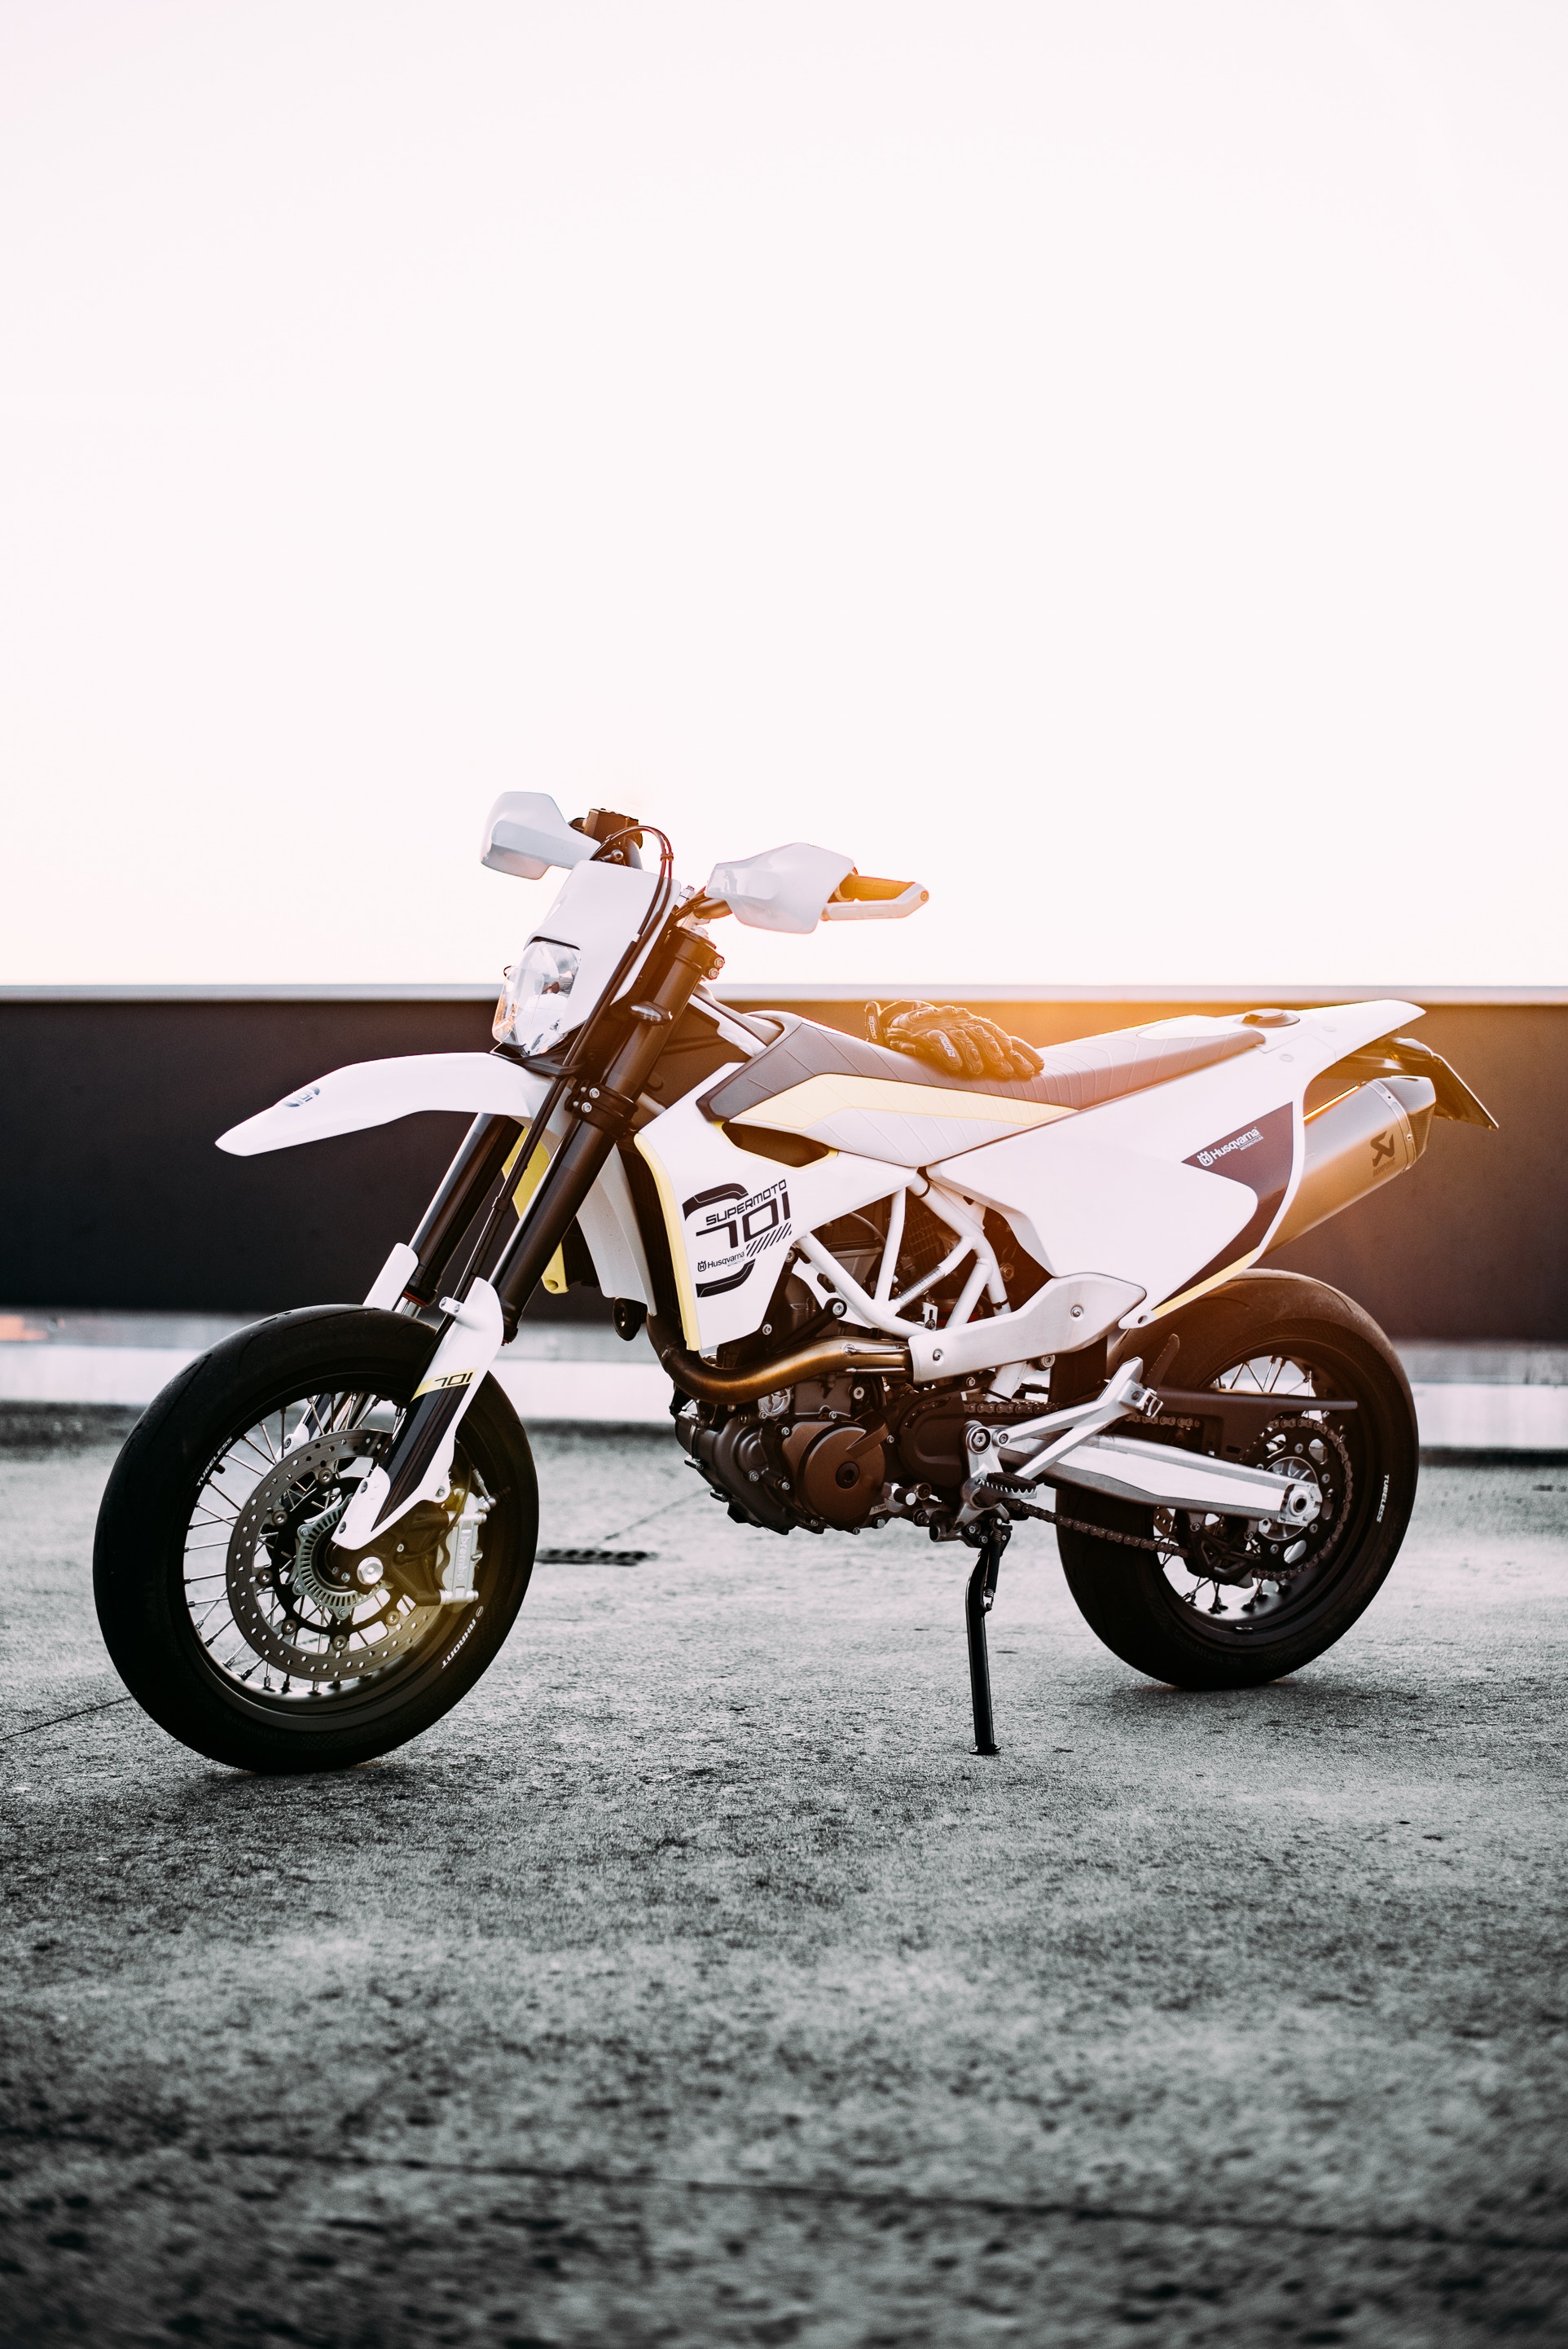 side view, motorcycles, white, motorcycle mobile wallpaper